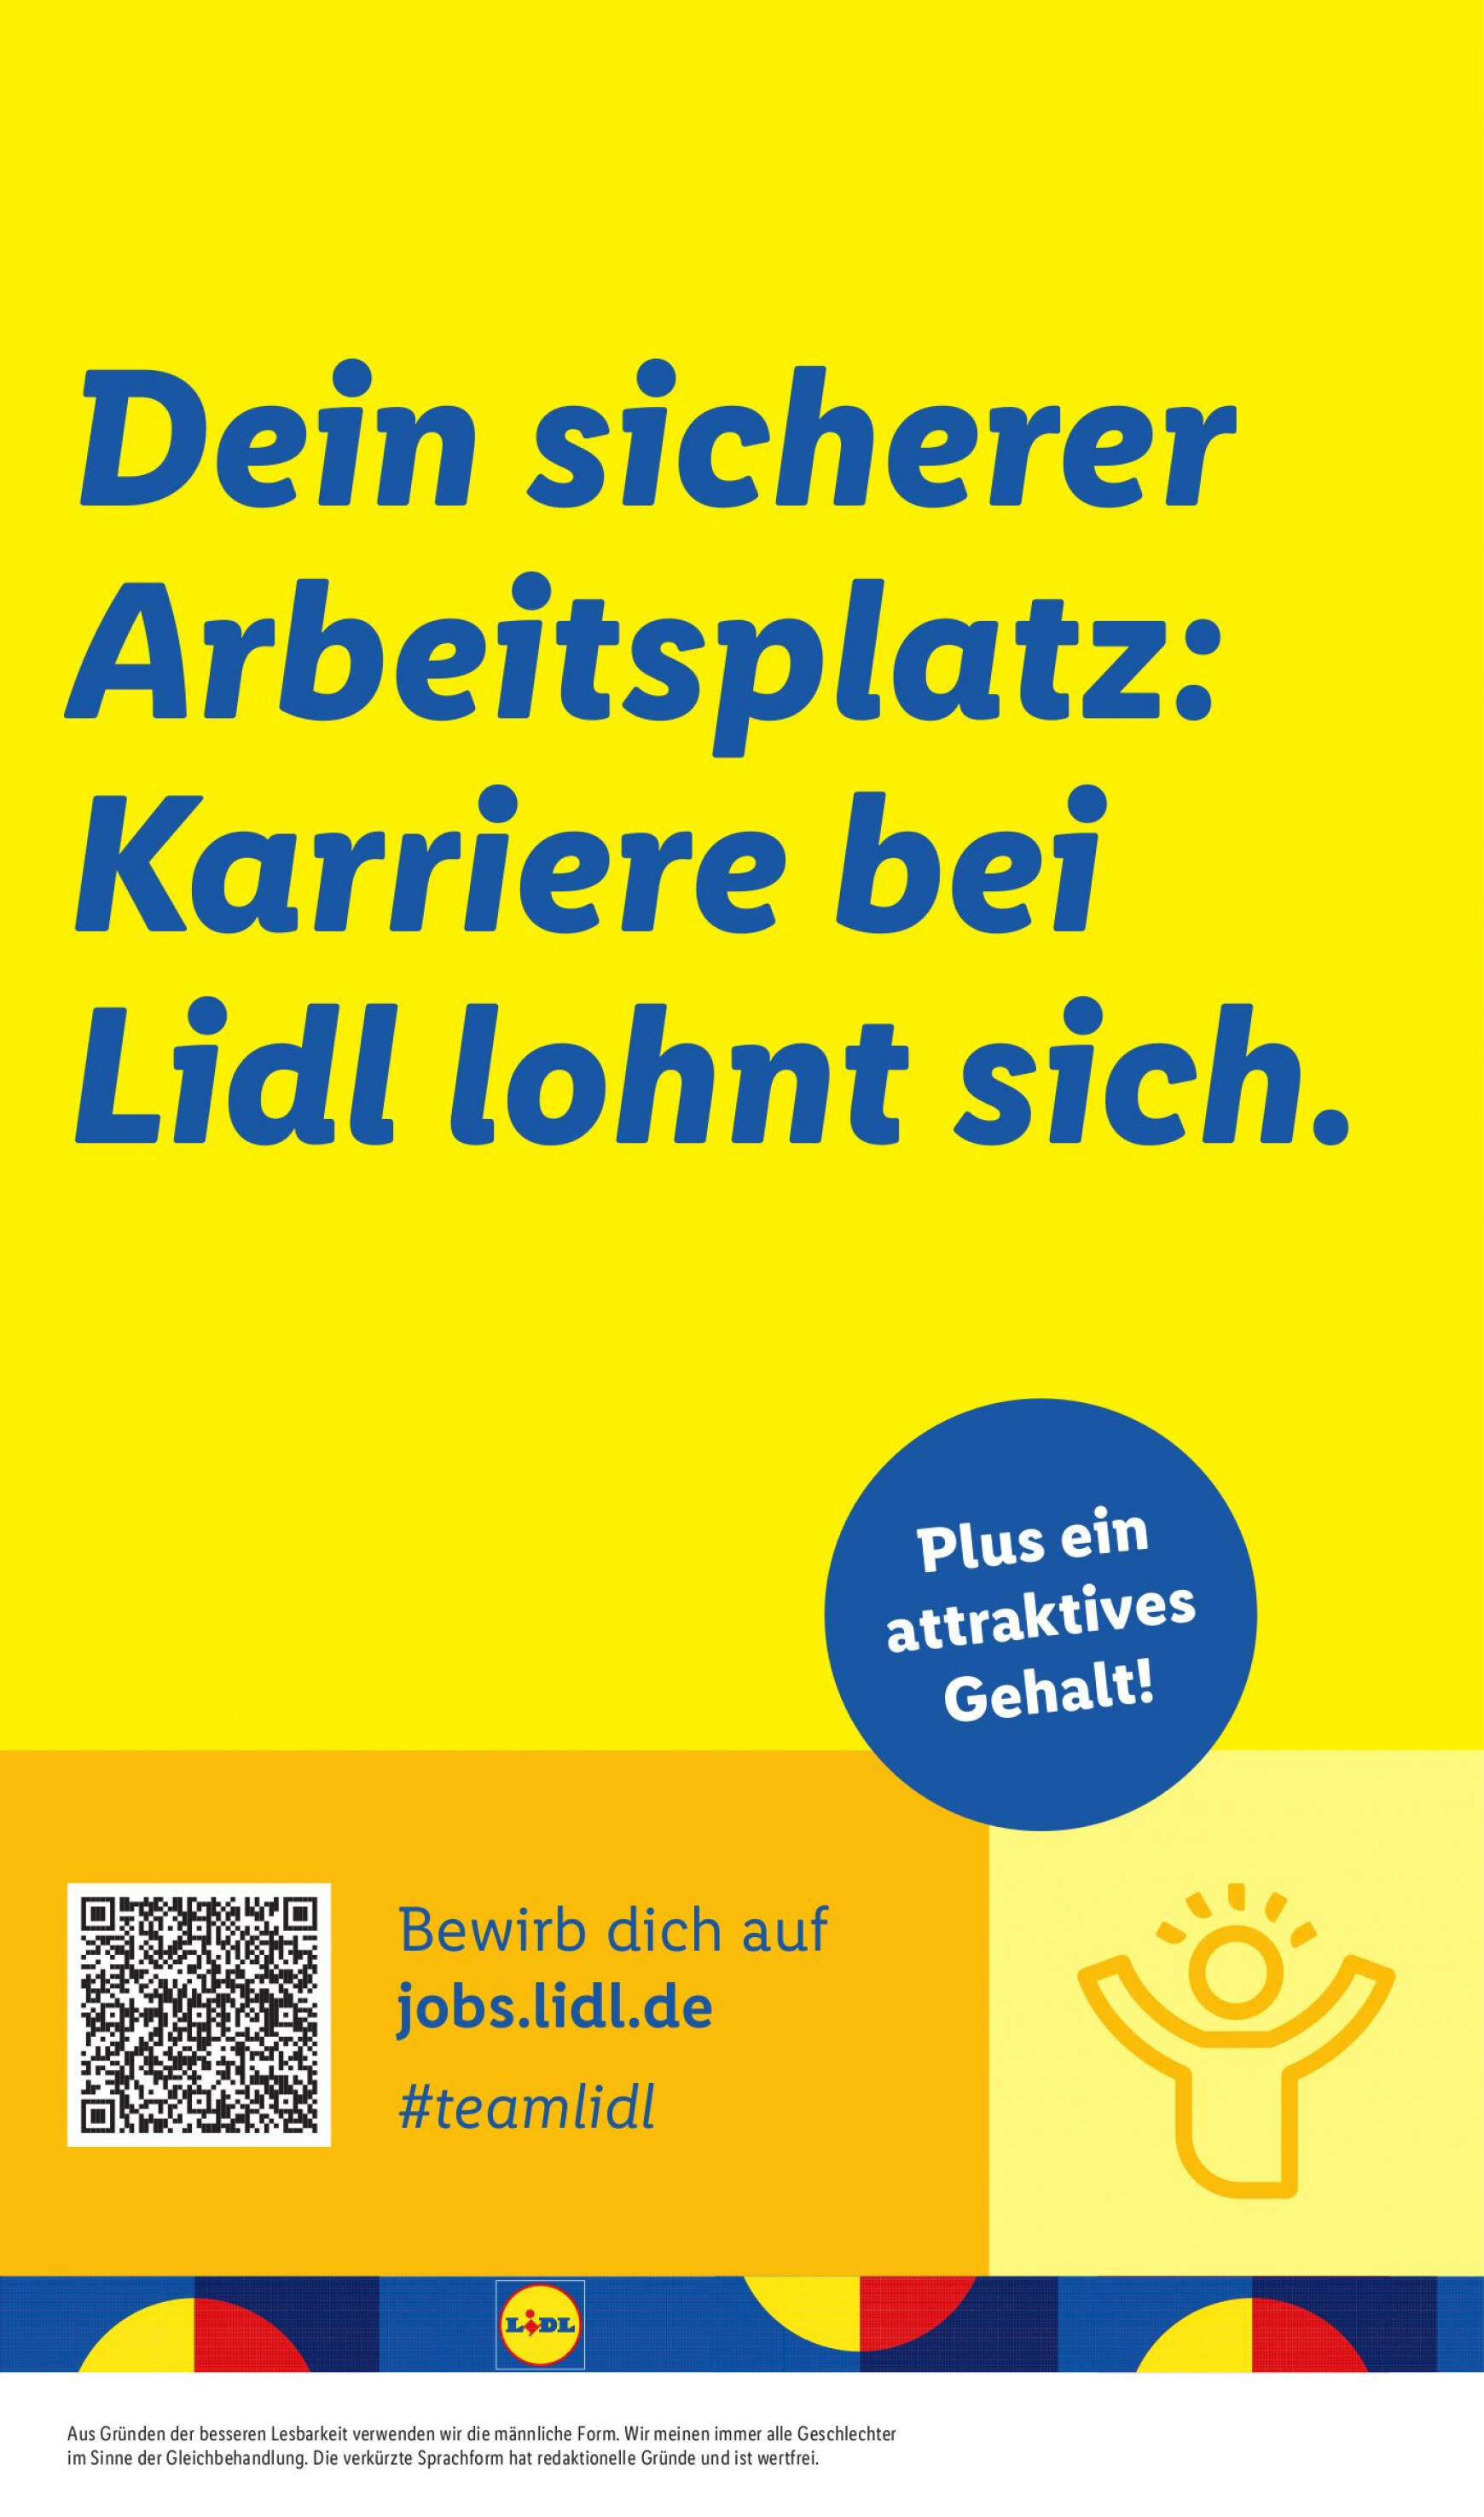 lidl - Flyer Lidl aktuell 17.06. - 22.06. - page: 53